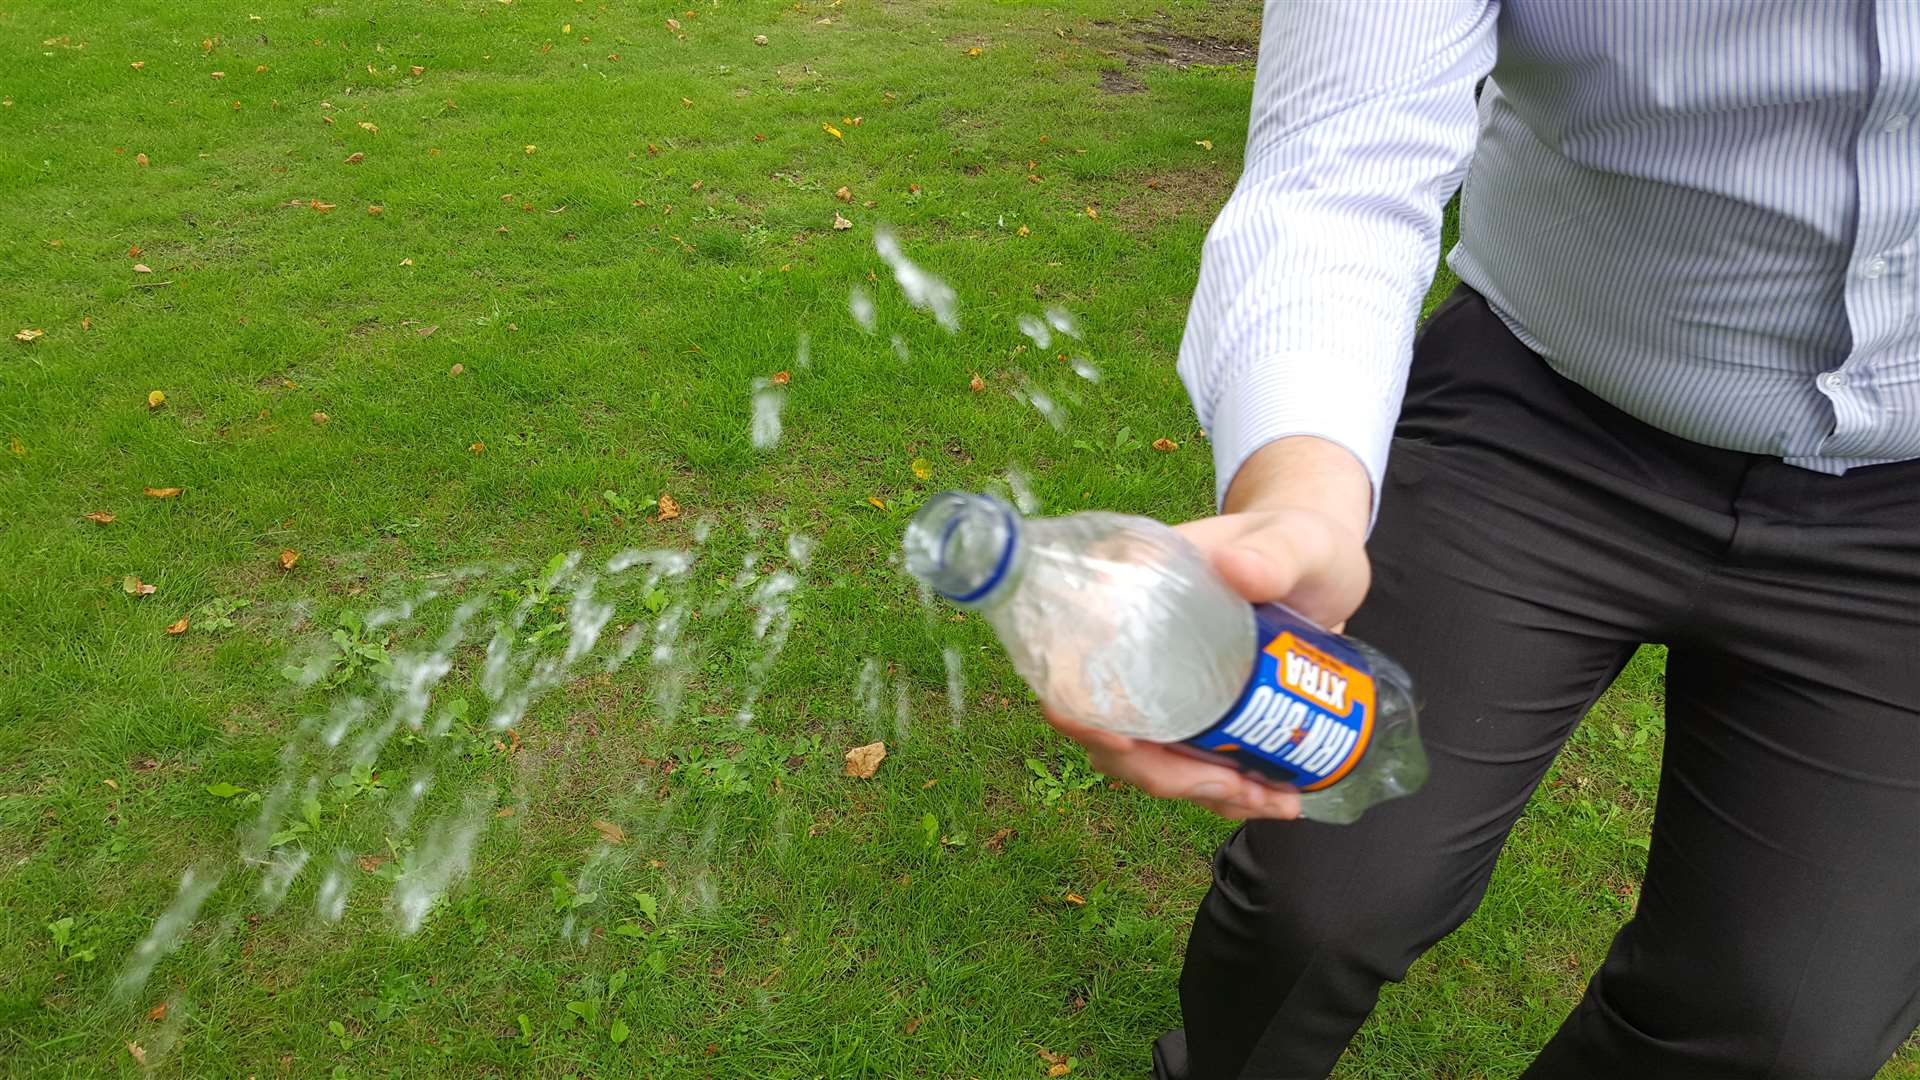 The substance was thrown from an Irn Bru bottle (3742791)